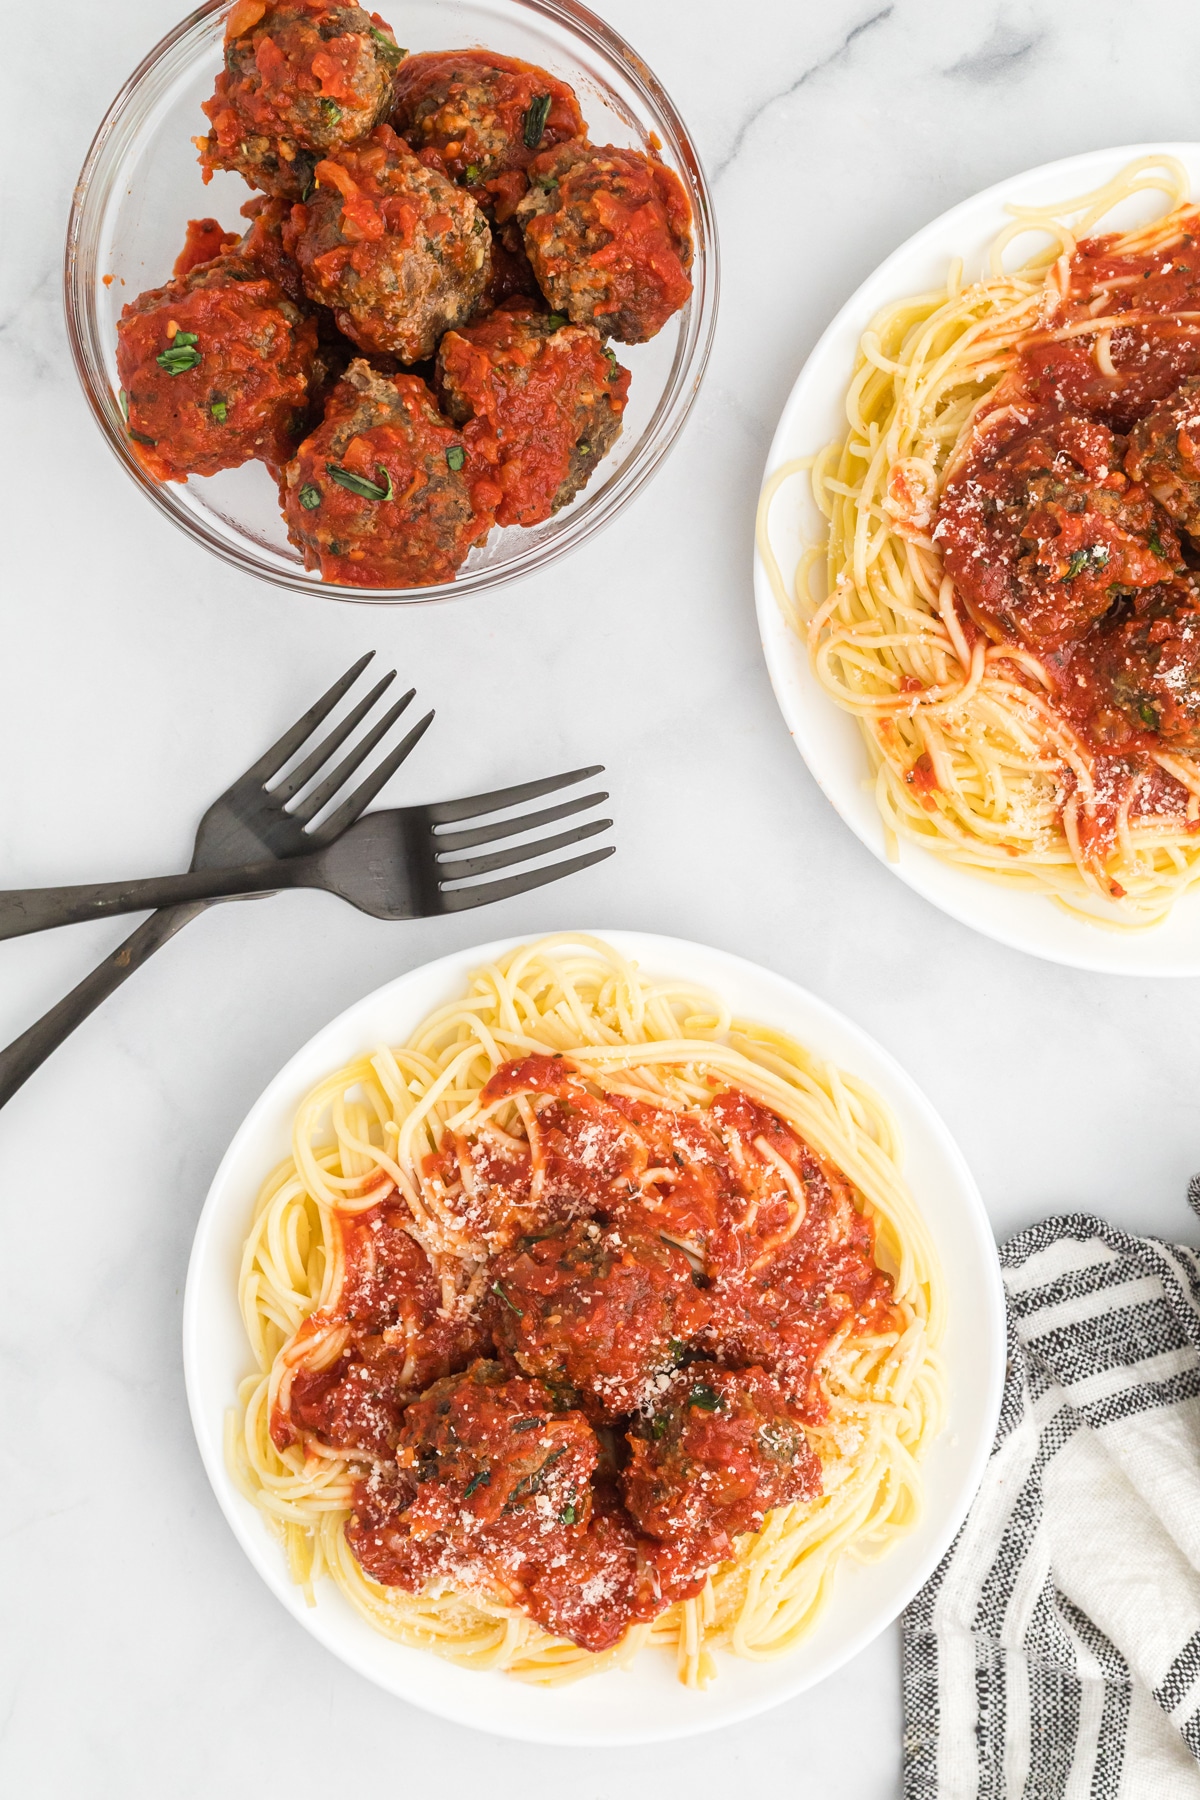 Overhead of a plate of spaghetti and meatballs and a bowl of meatballs